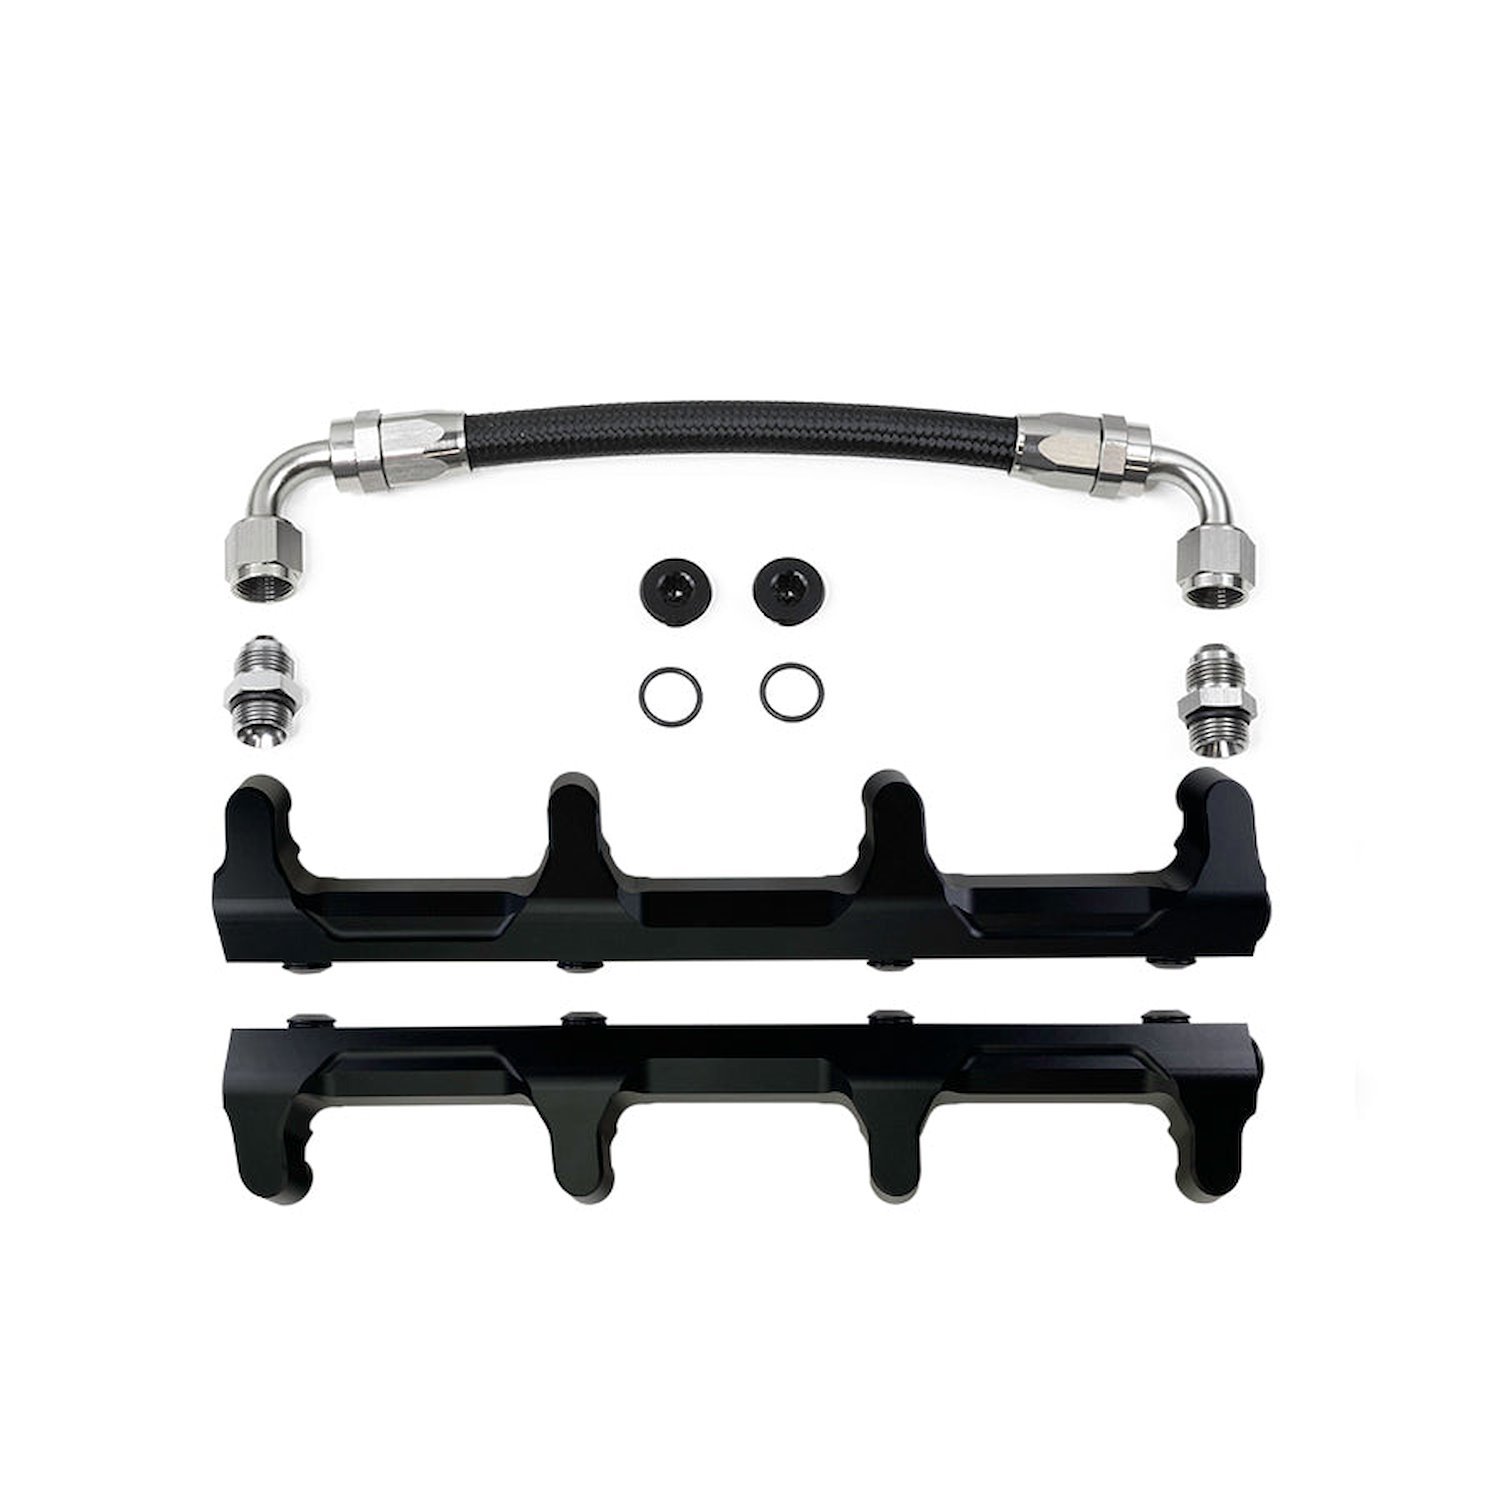 7205 Chevrolet LSA and LS9 Fuel Rail with Crossover for 2012-15 Camaro ZL1 2008-13 CTS-V 2009-13 Corvette ZR1